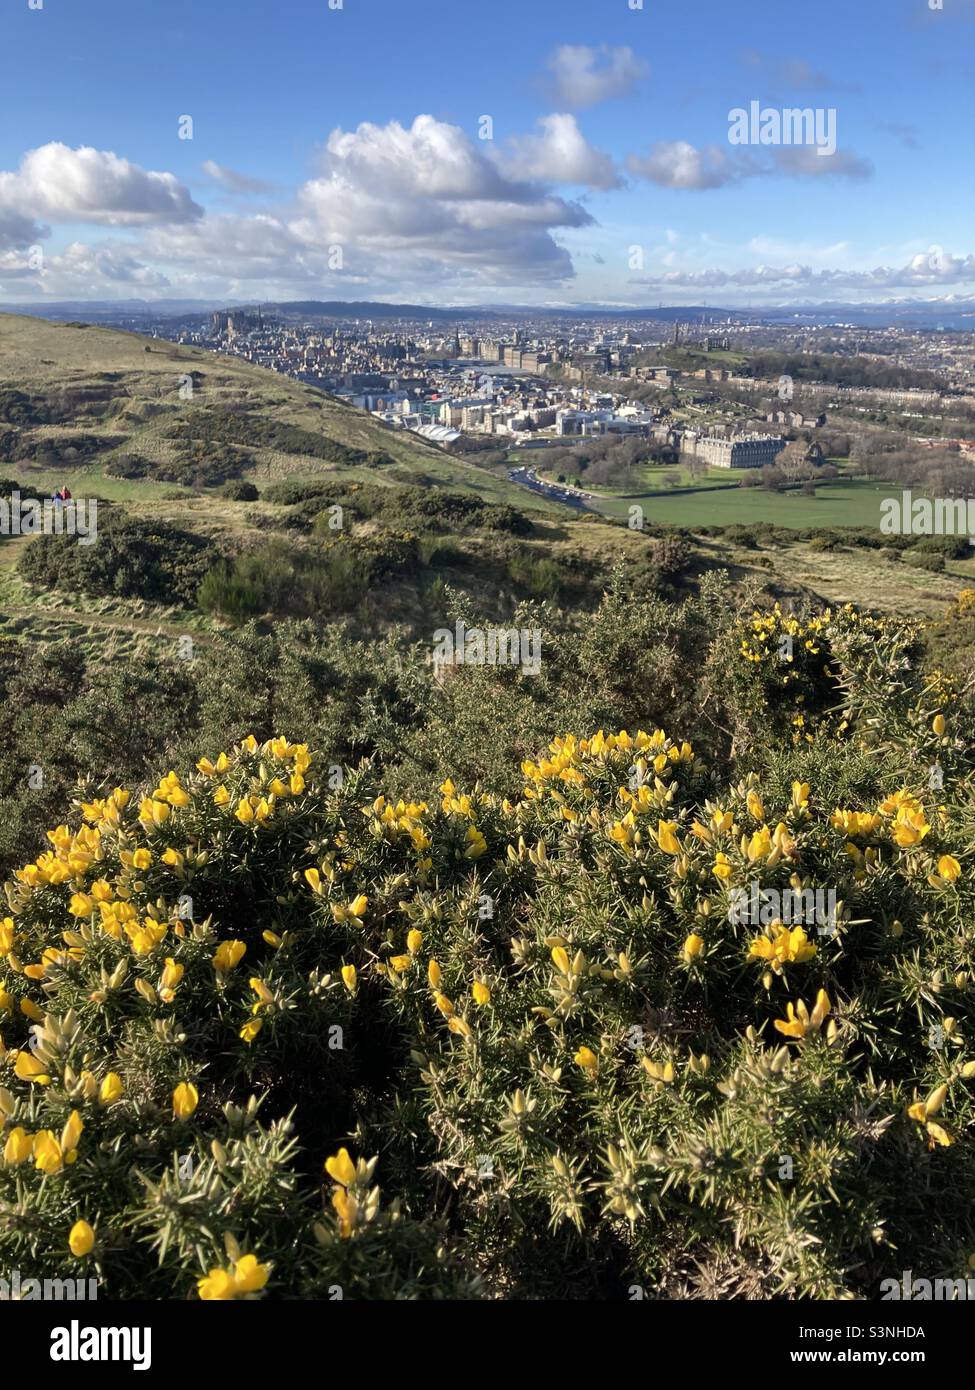 View towards Edinburgh castle and old town over the gorse bushes in Holyrood Park, Edinburgh Stock Photo